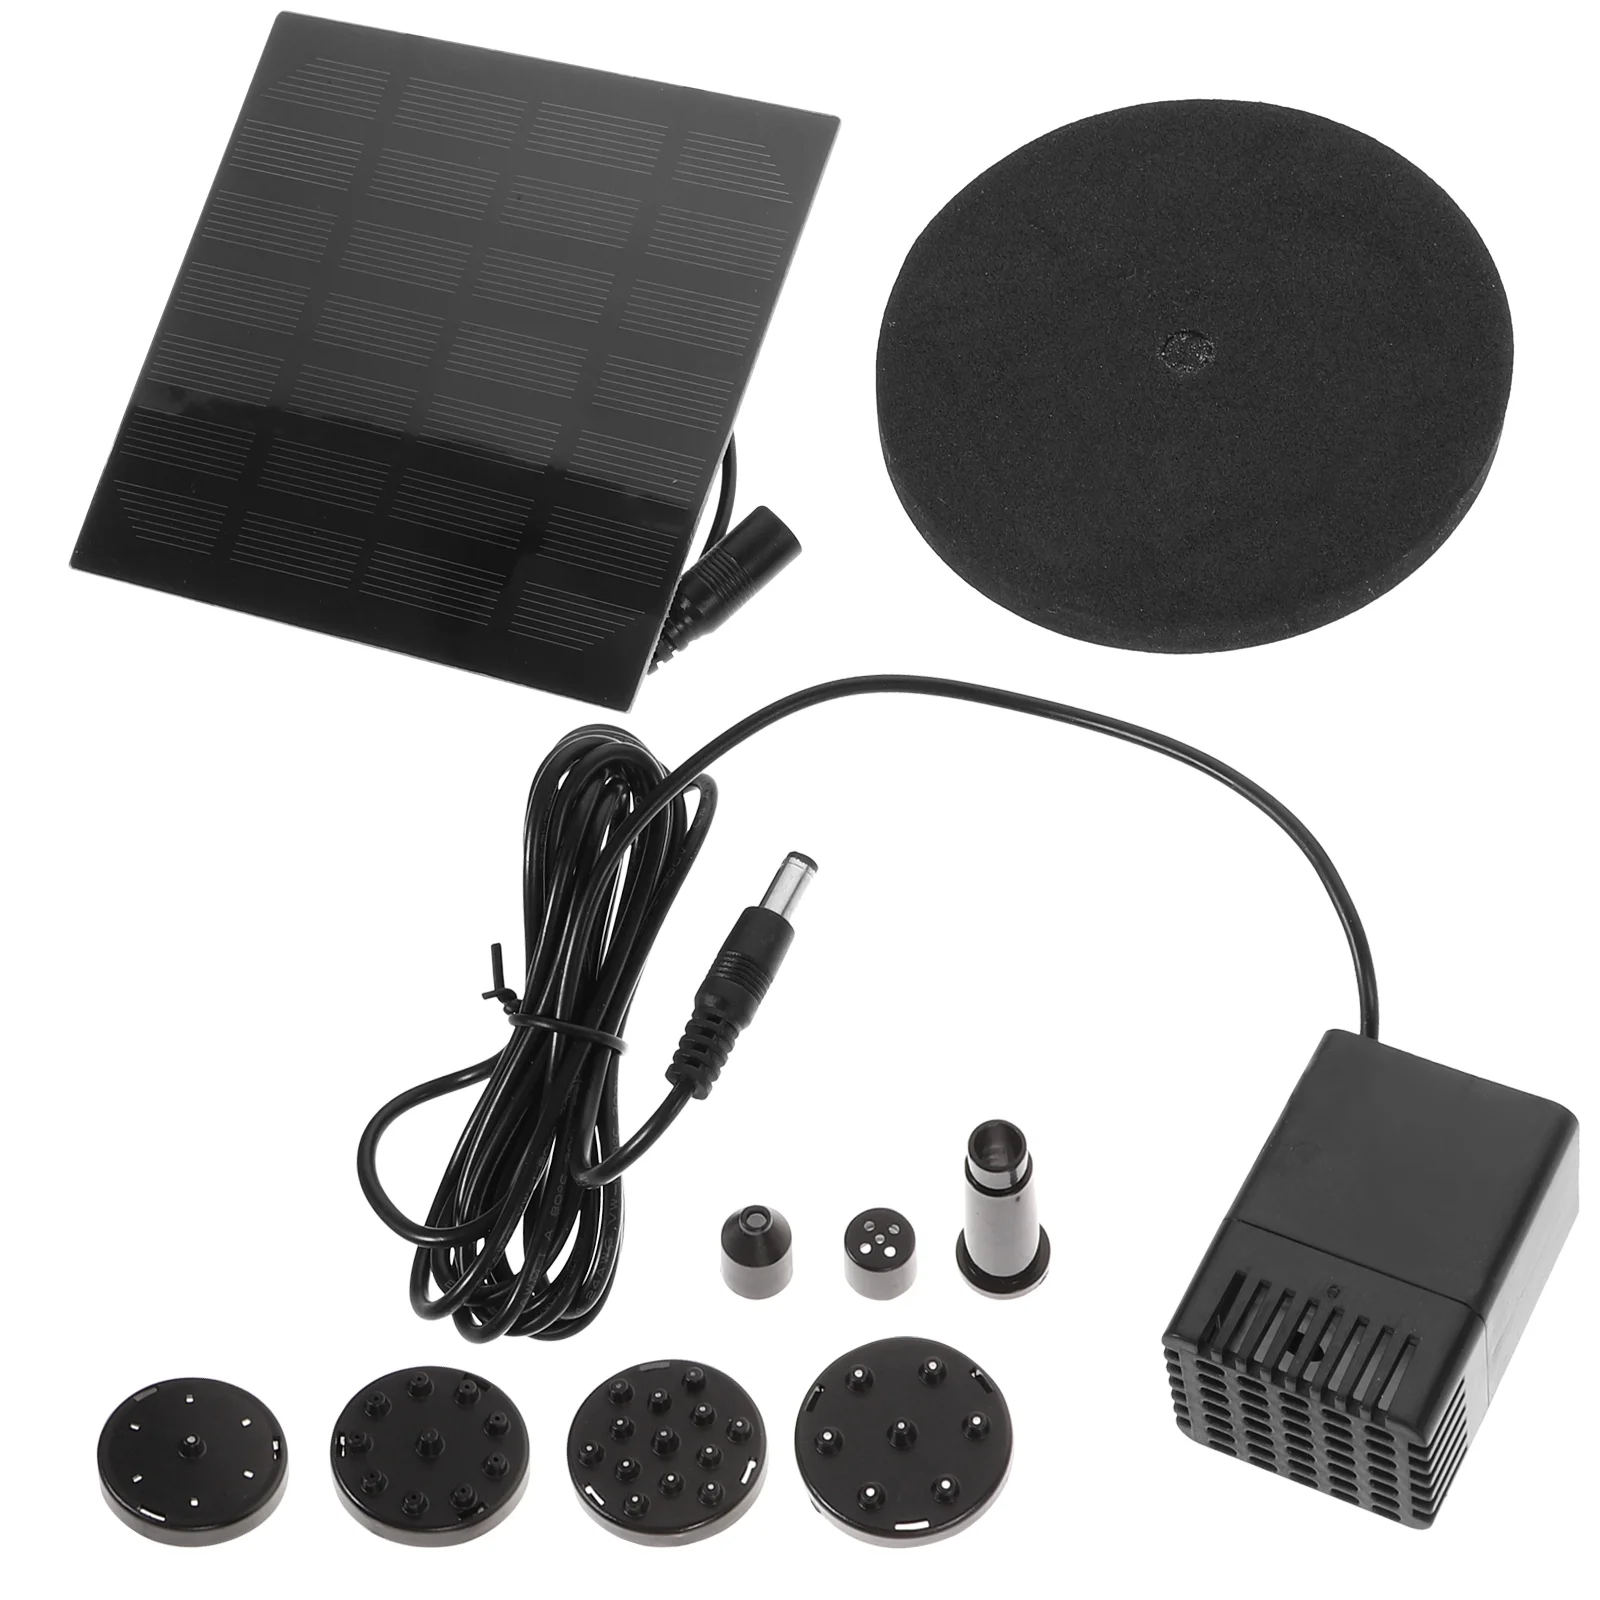 

12 W Solar Water Pump Outdoor Watering Submersible Water Fountain for Pond Pool Aquarium Fountains Spout Garden Patio